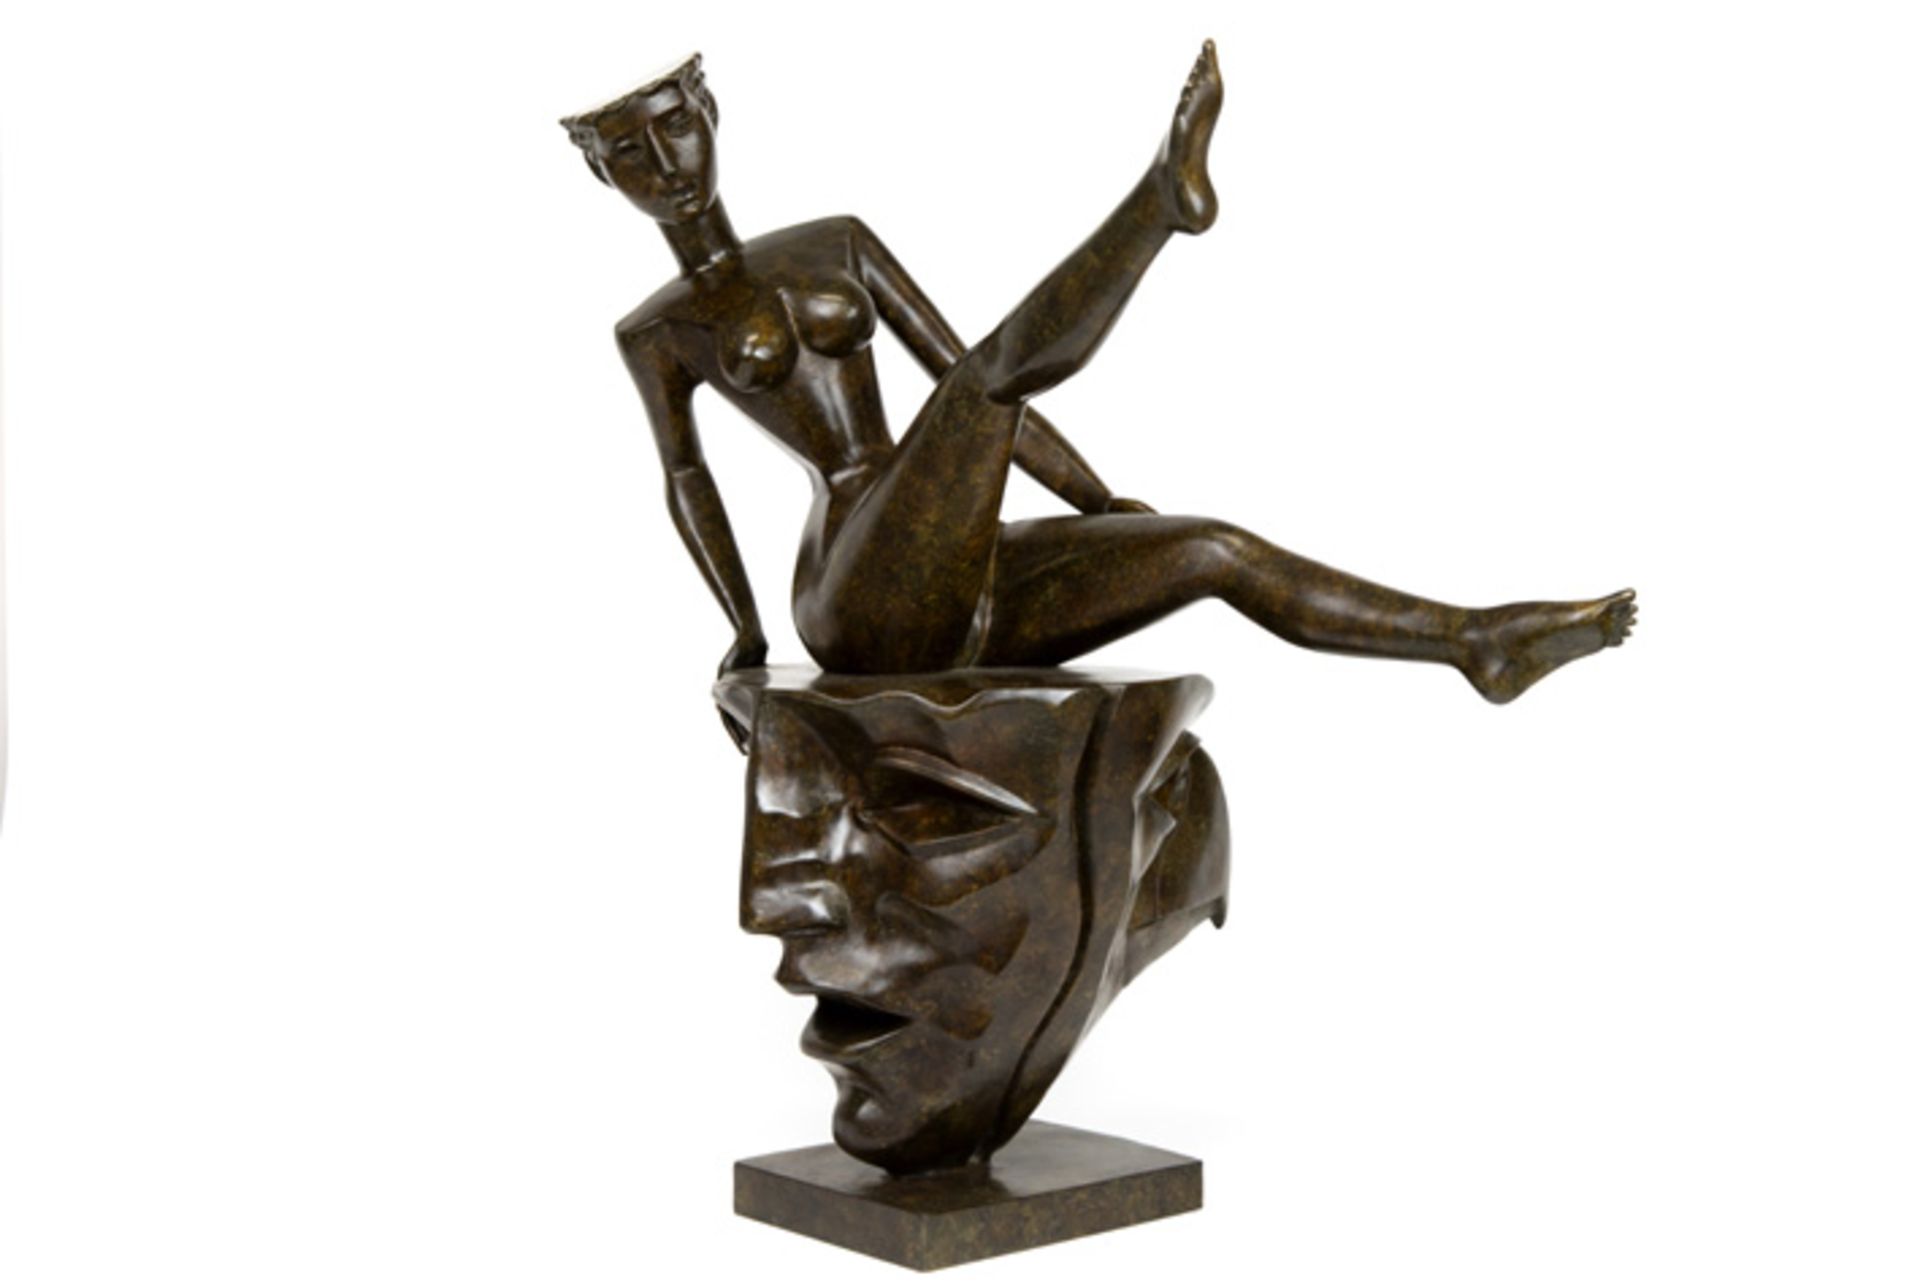 21st Cent. "Lady on the top" sculpture in bronze - signed Igor Tcholaria and with foundry mark - Bild 2 aus 5